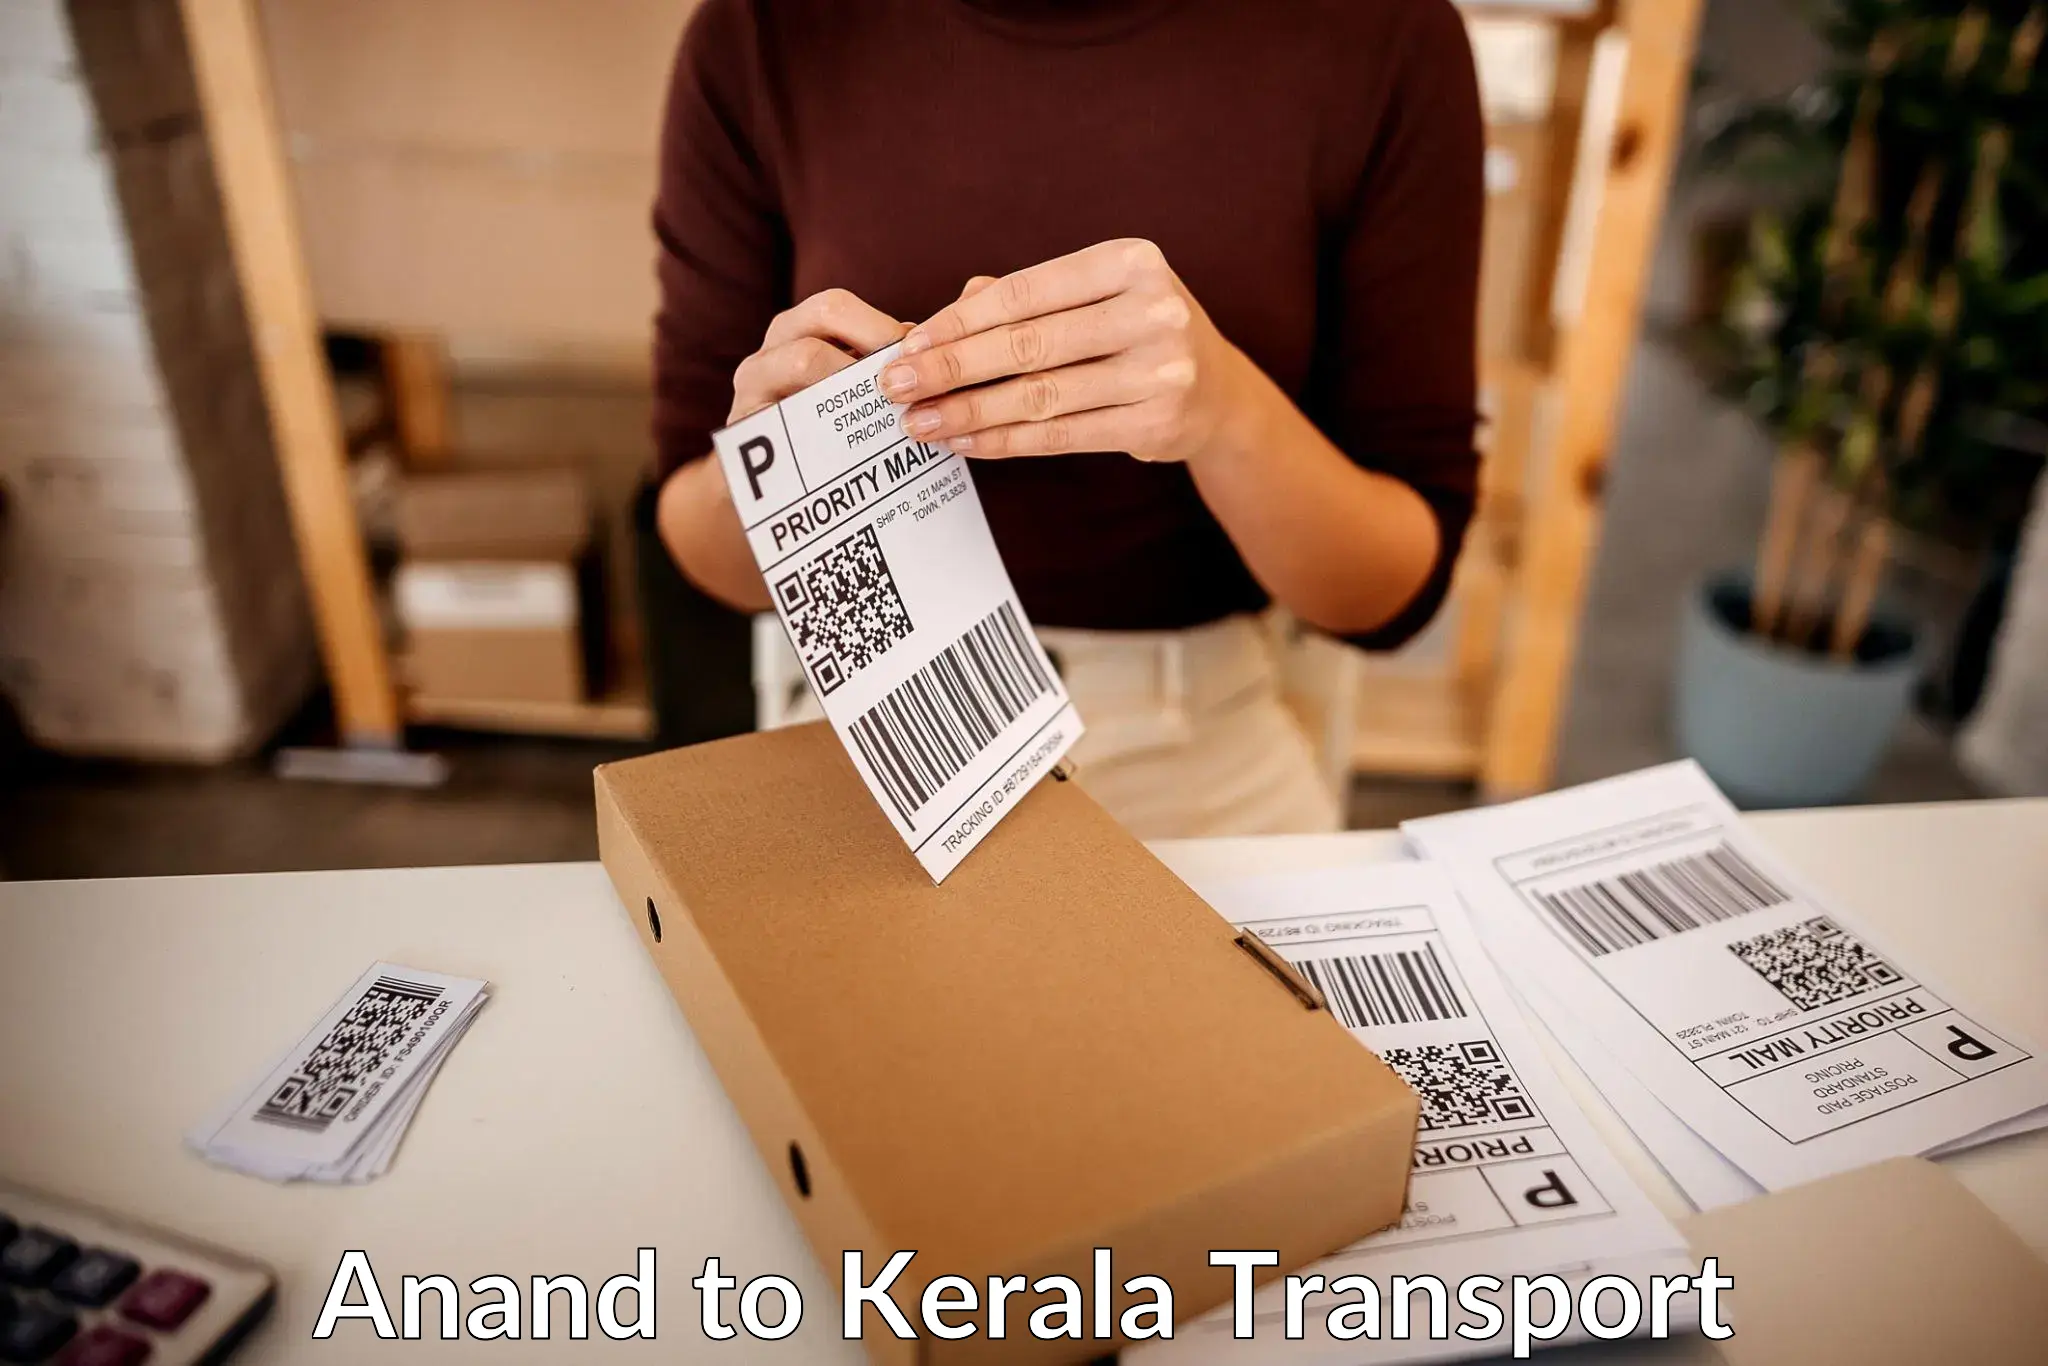 Transport in sharing Anand to Kottayam